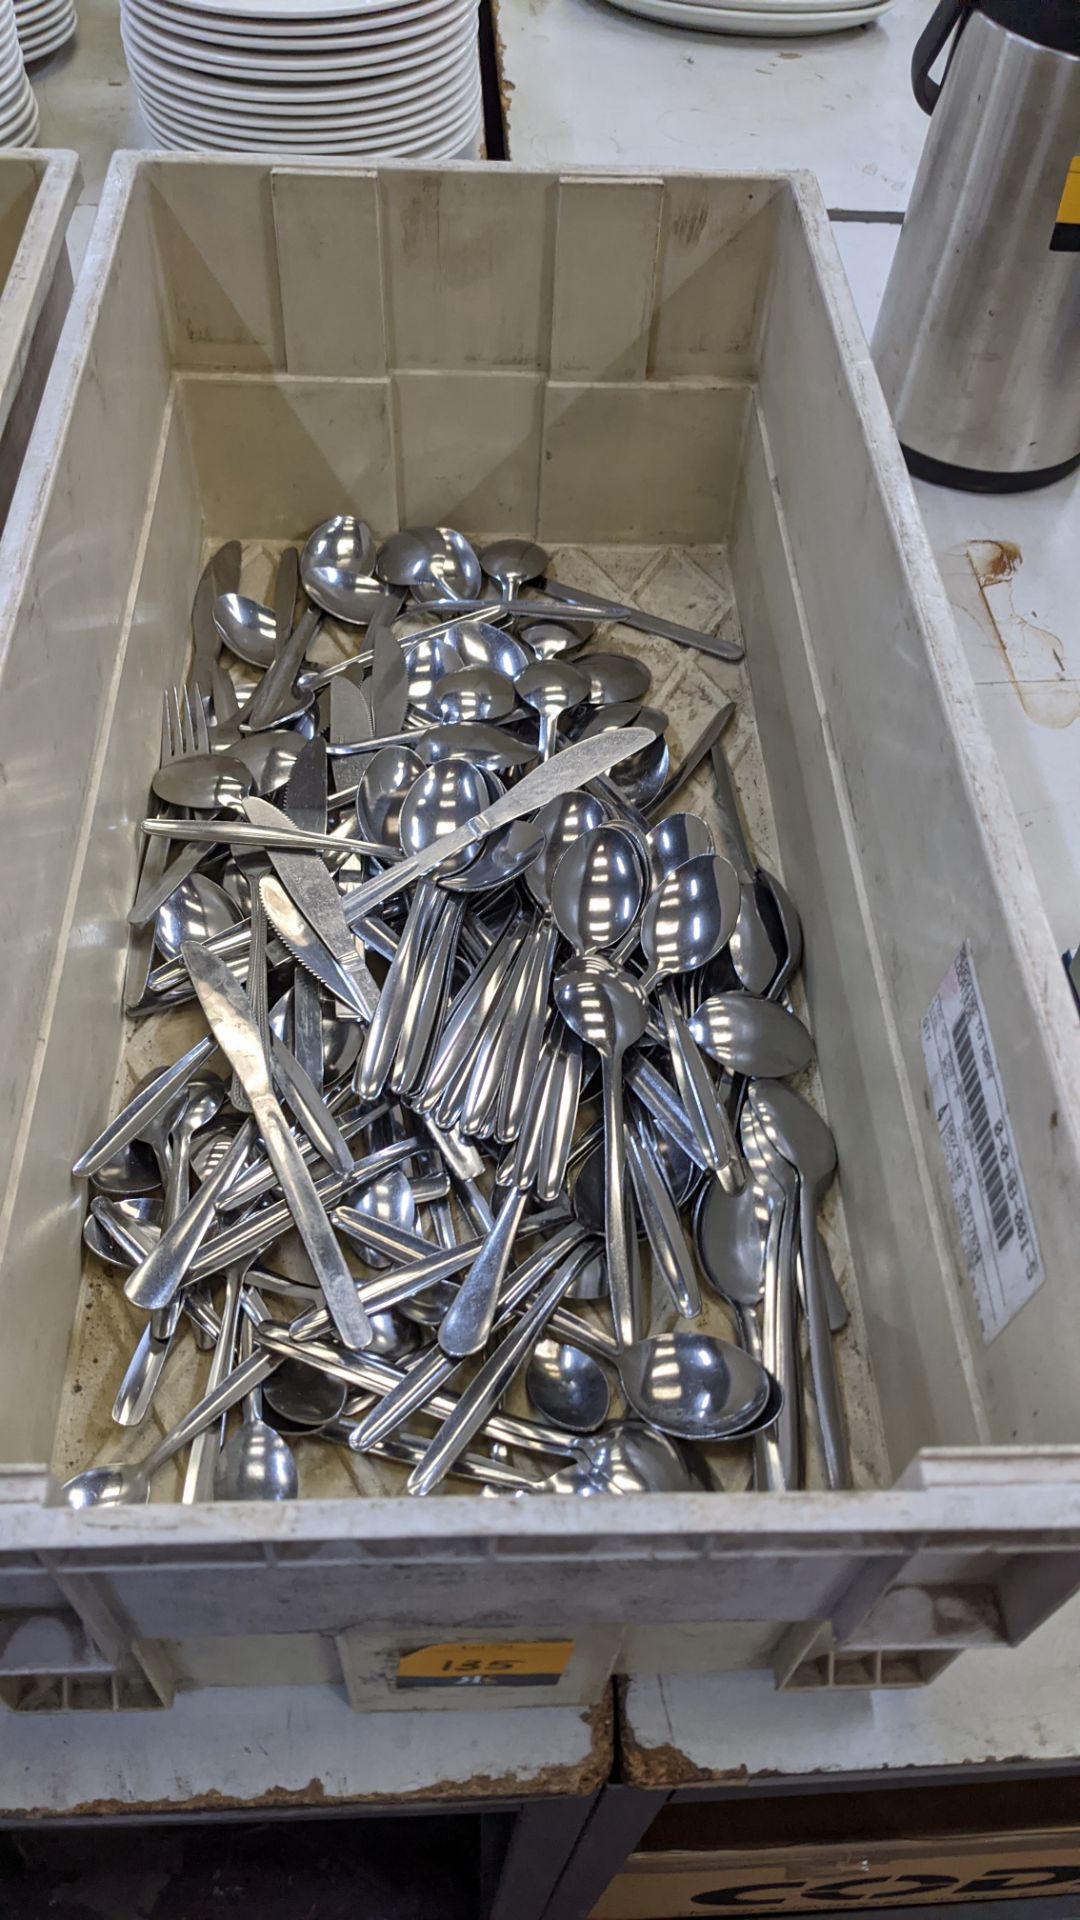 Contents of a crate of cutlery